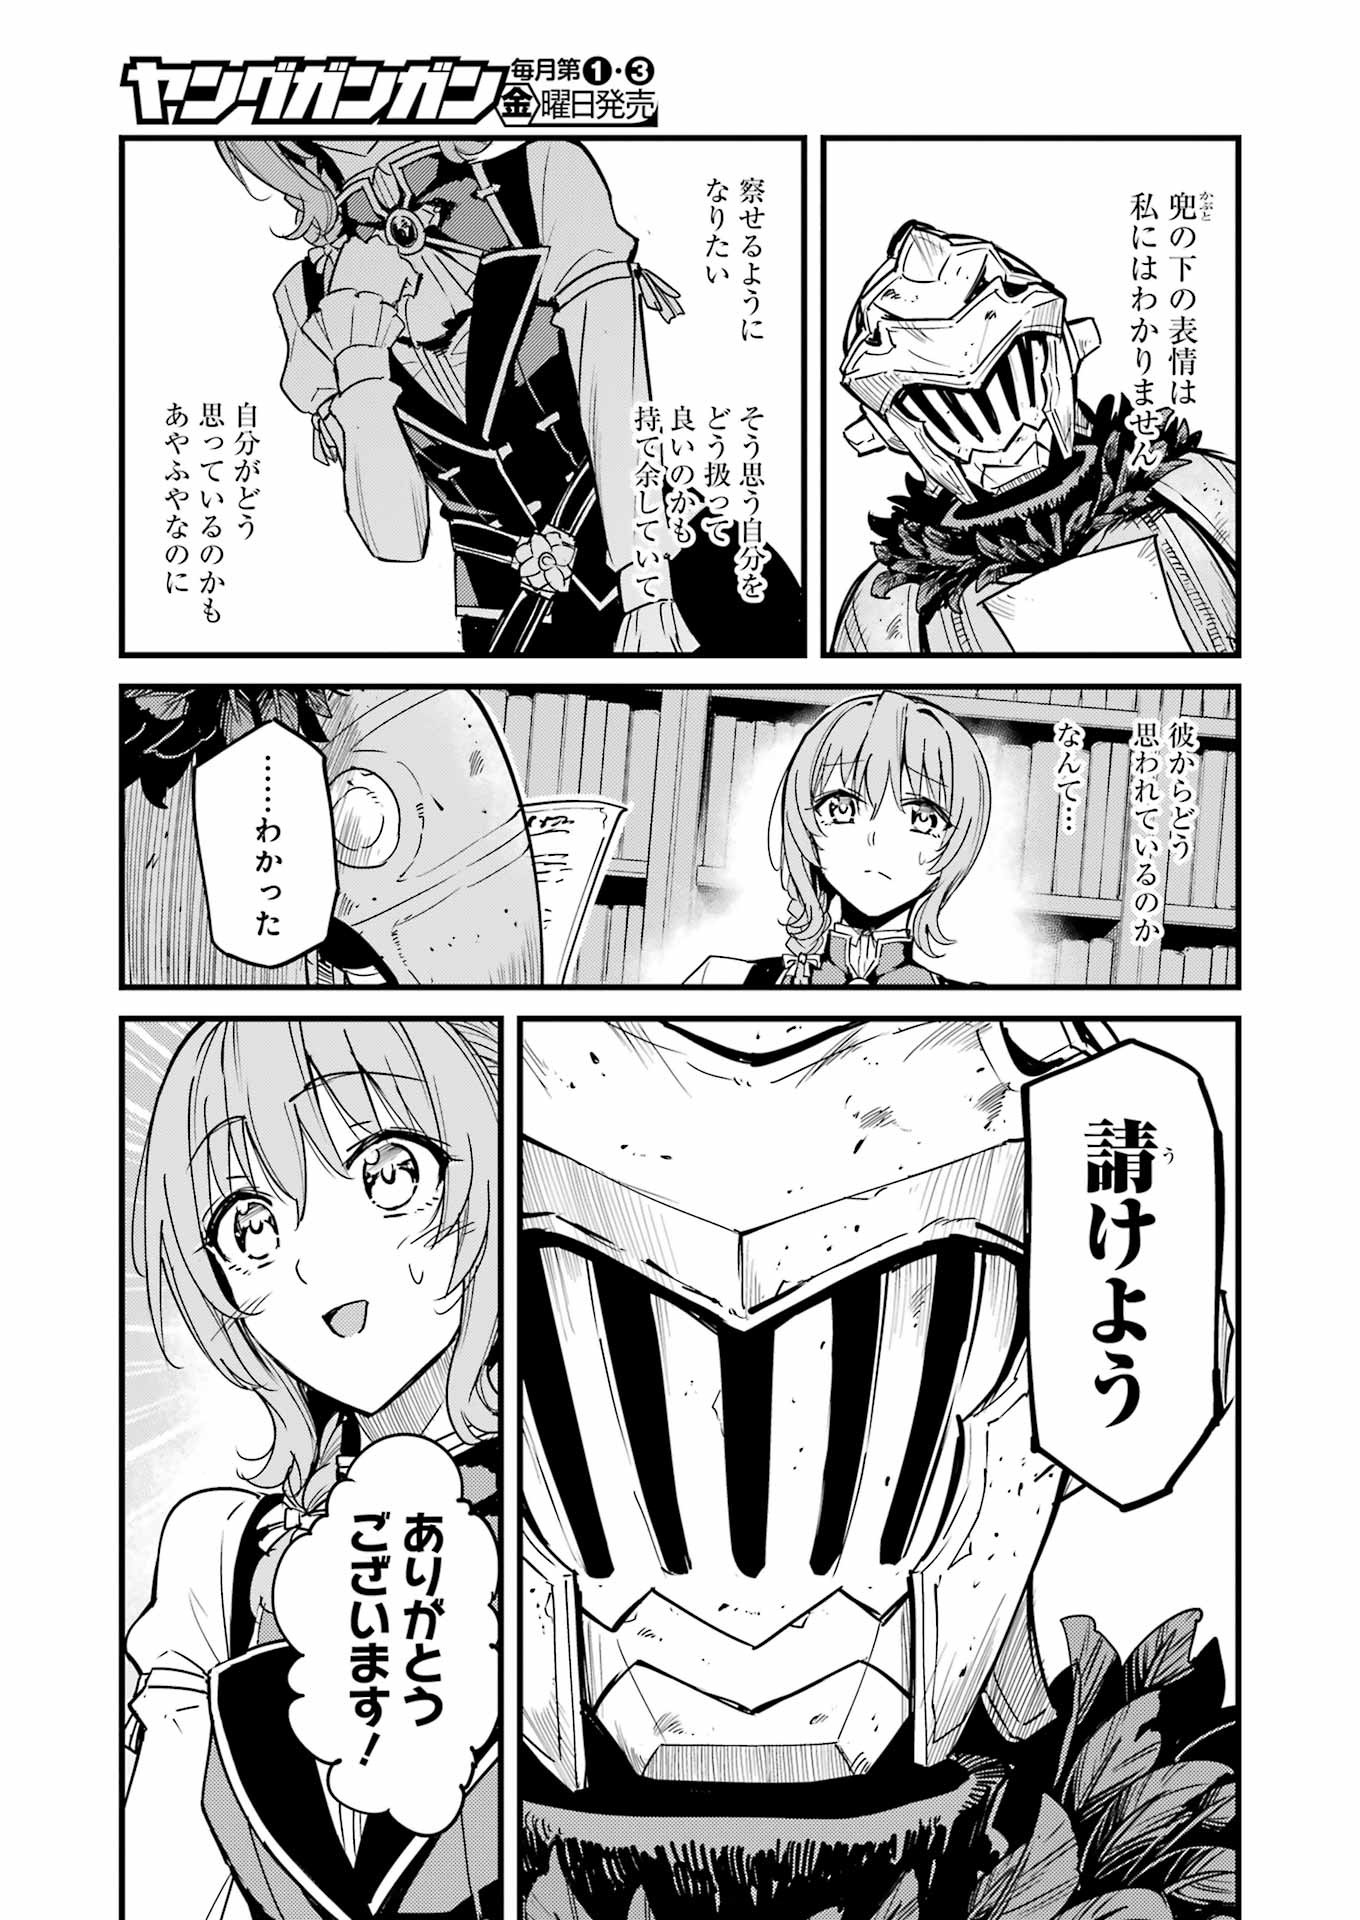 Goblin Slayer: Side Story Year One - Chapter 95 - Page 17